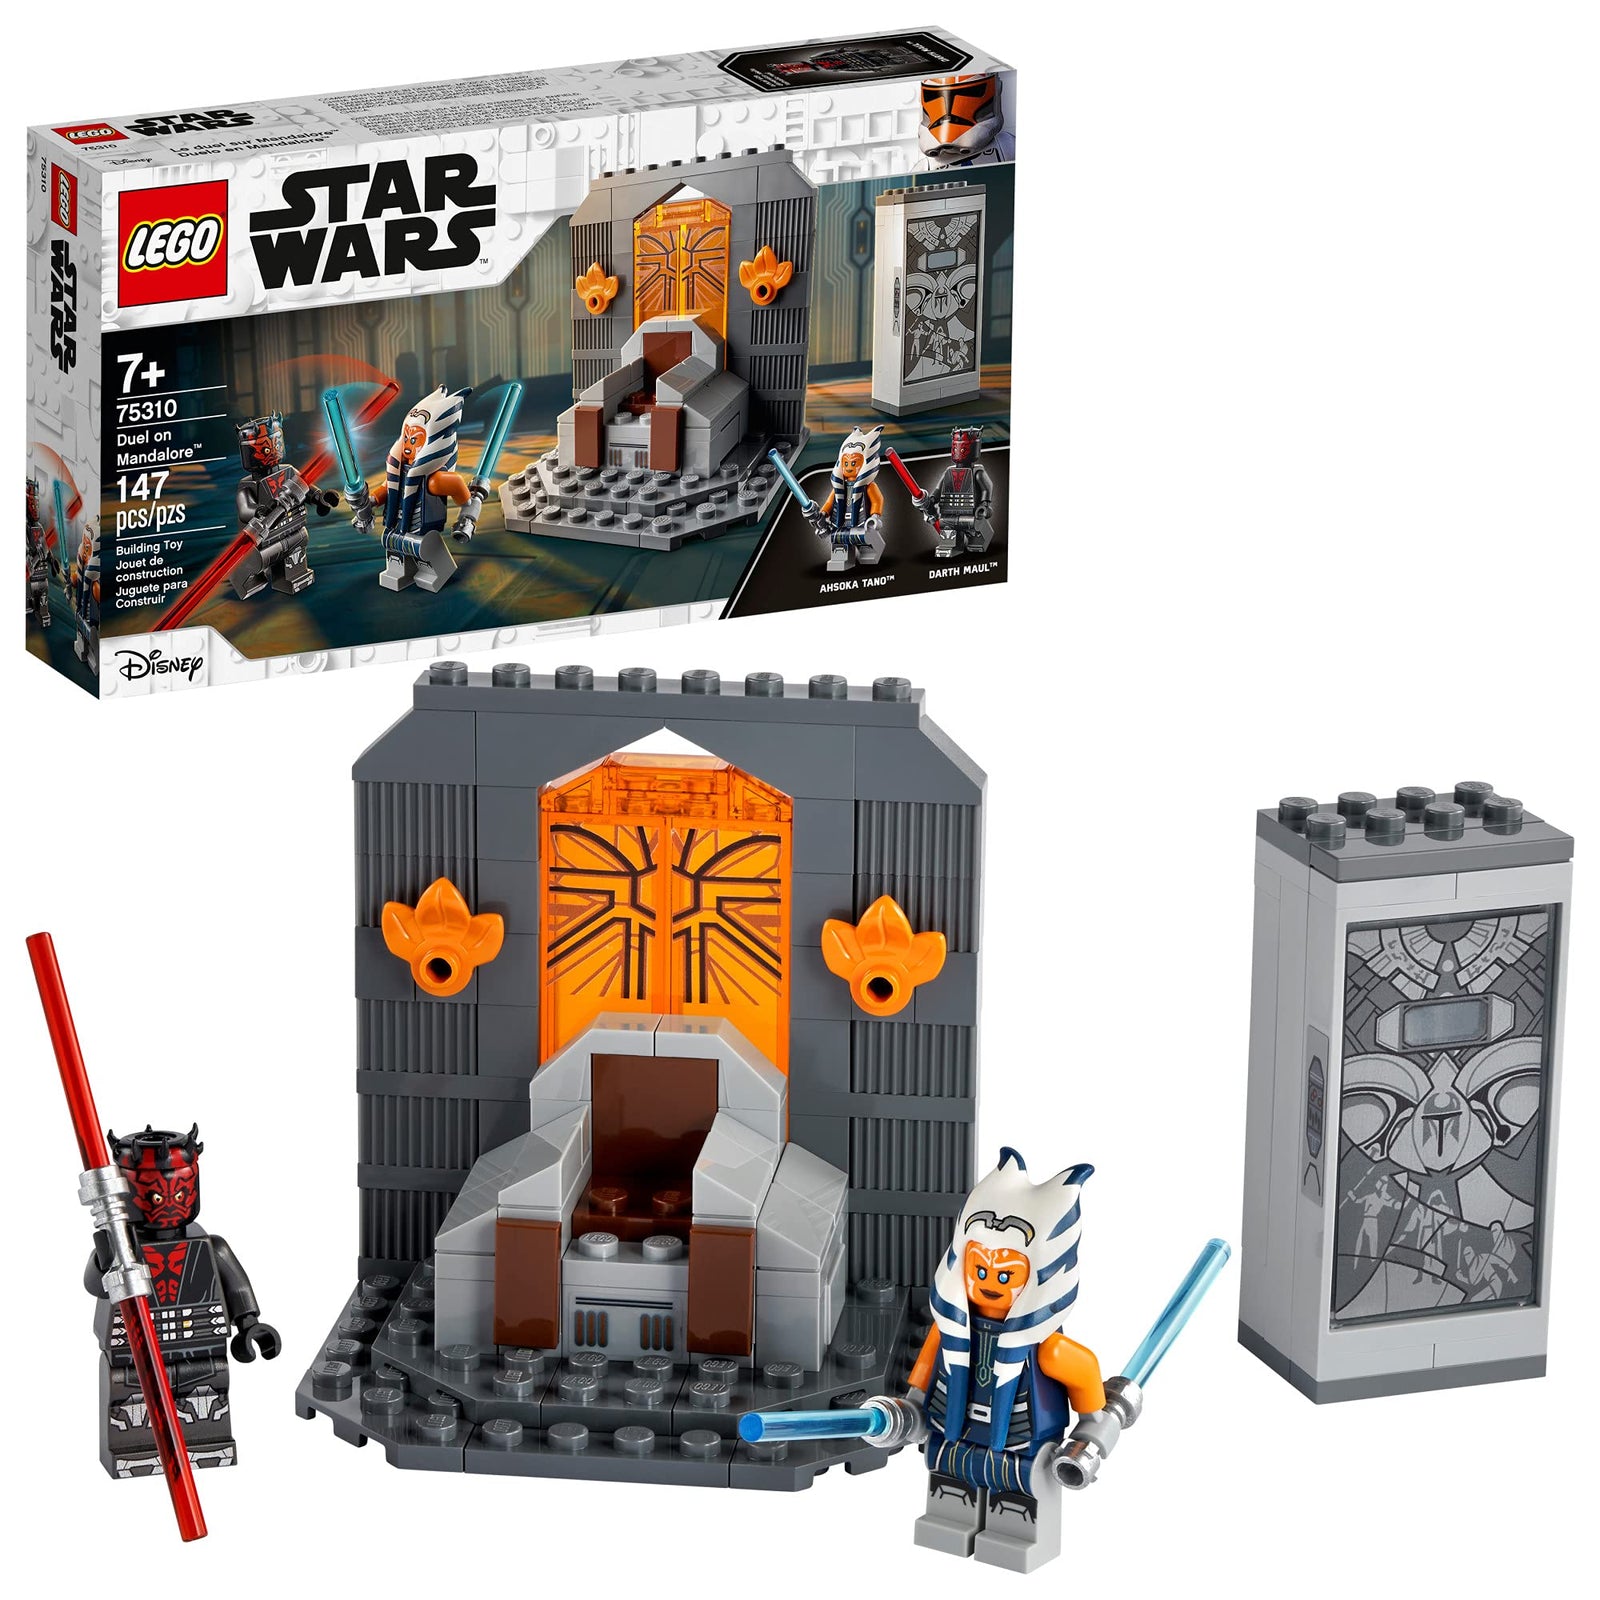 LEGO Star Wars: The Clone Wars Duel on Mandalore 75310 Awesome Toy Building Kit Featuring Ahsoka Tano and Darth Maul; New 2021 (147 Pieces)